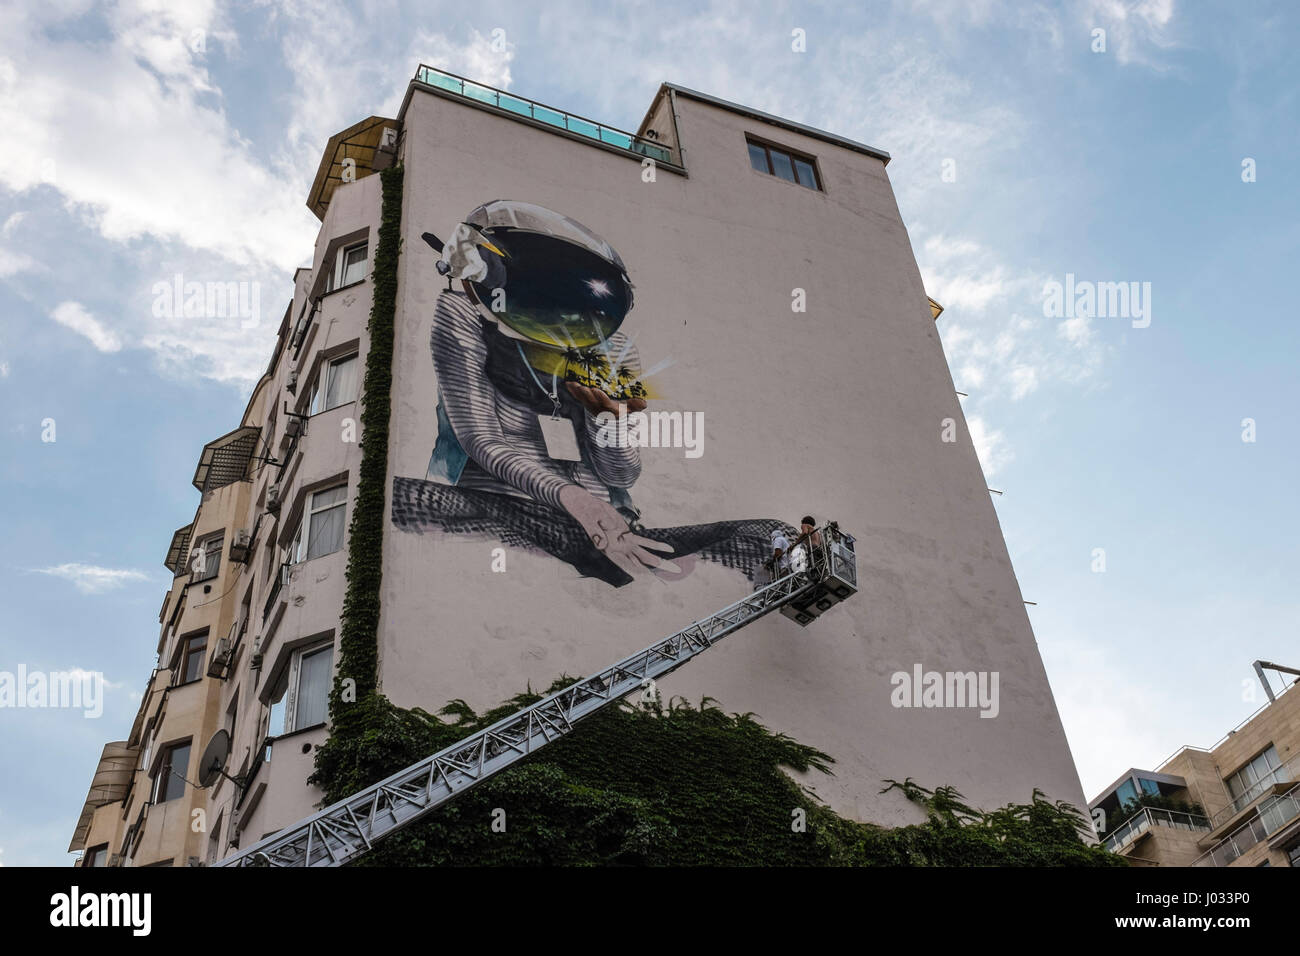 Street art graffiti being painted on apartment building in Tbilisi, Georgia, Eastern Europe Stock Photo